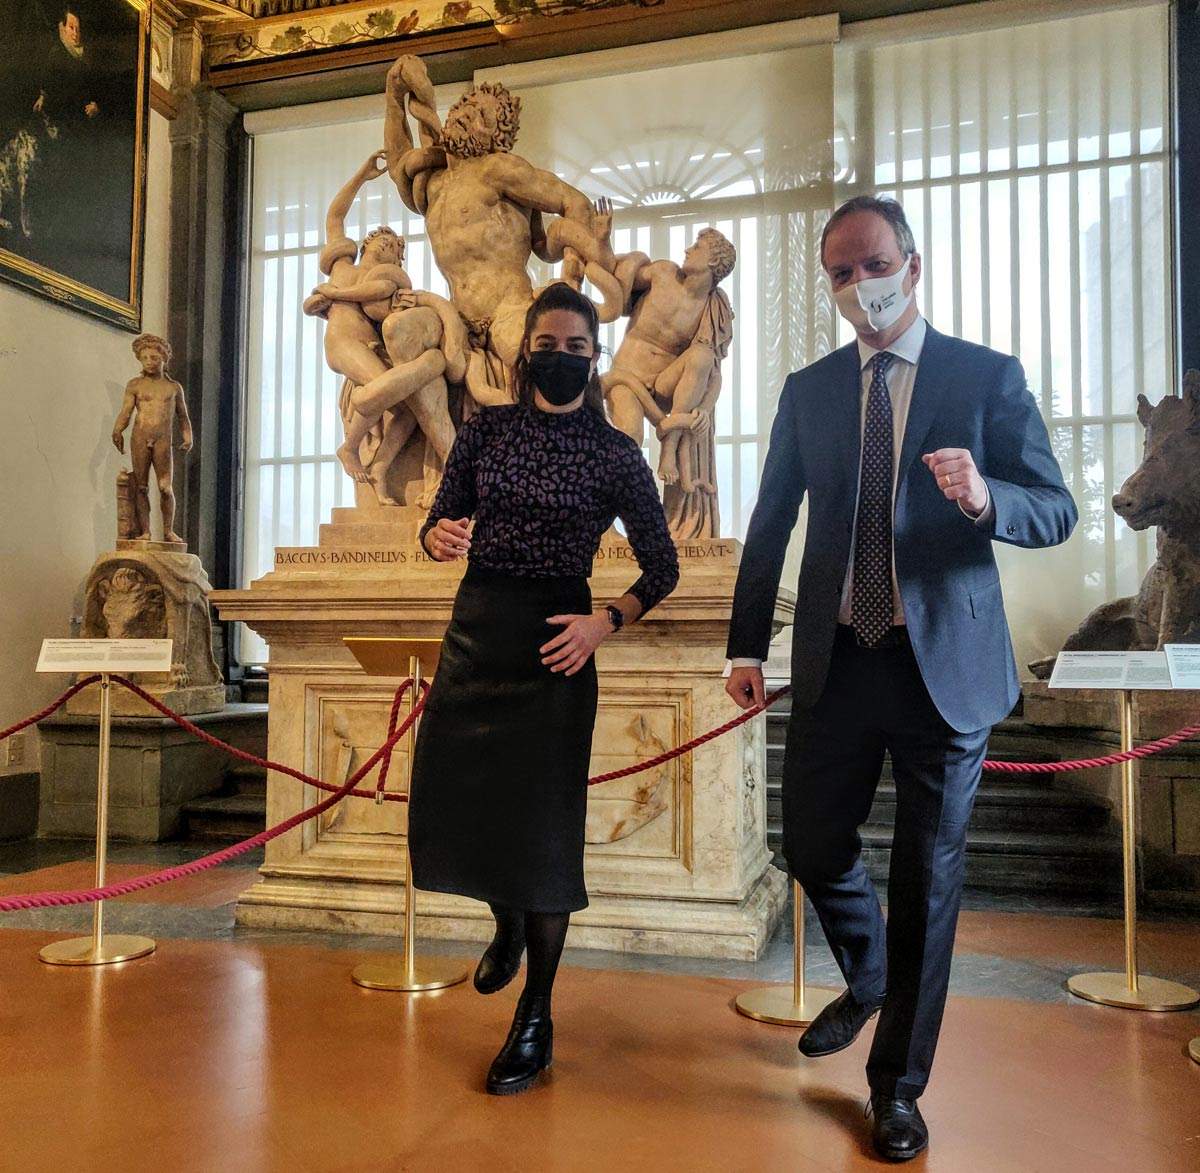 Uffizi reopens and Schmidt also welcomes Tessel Middag, women's soccer star